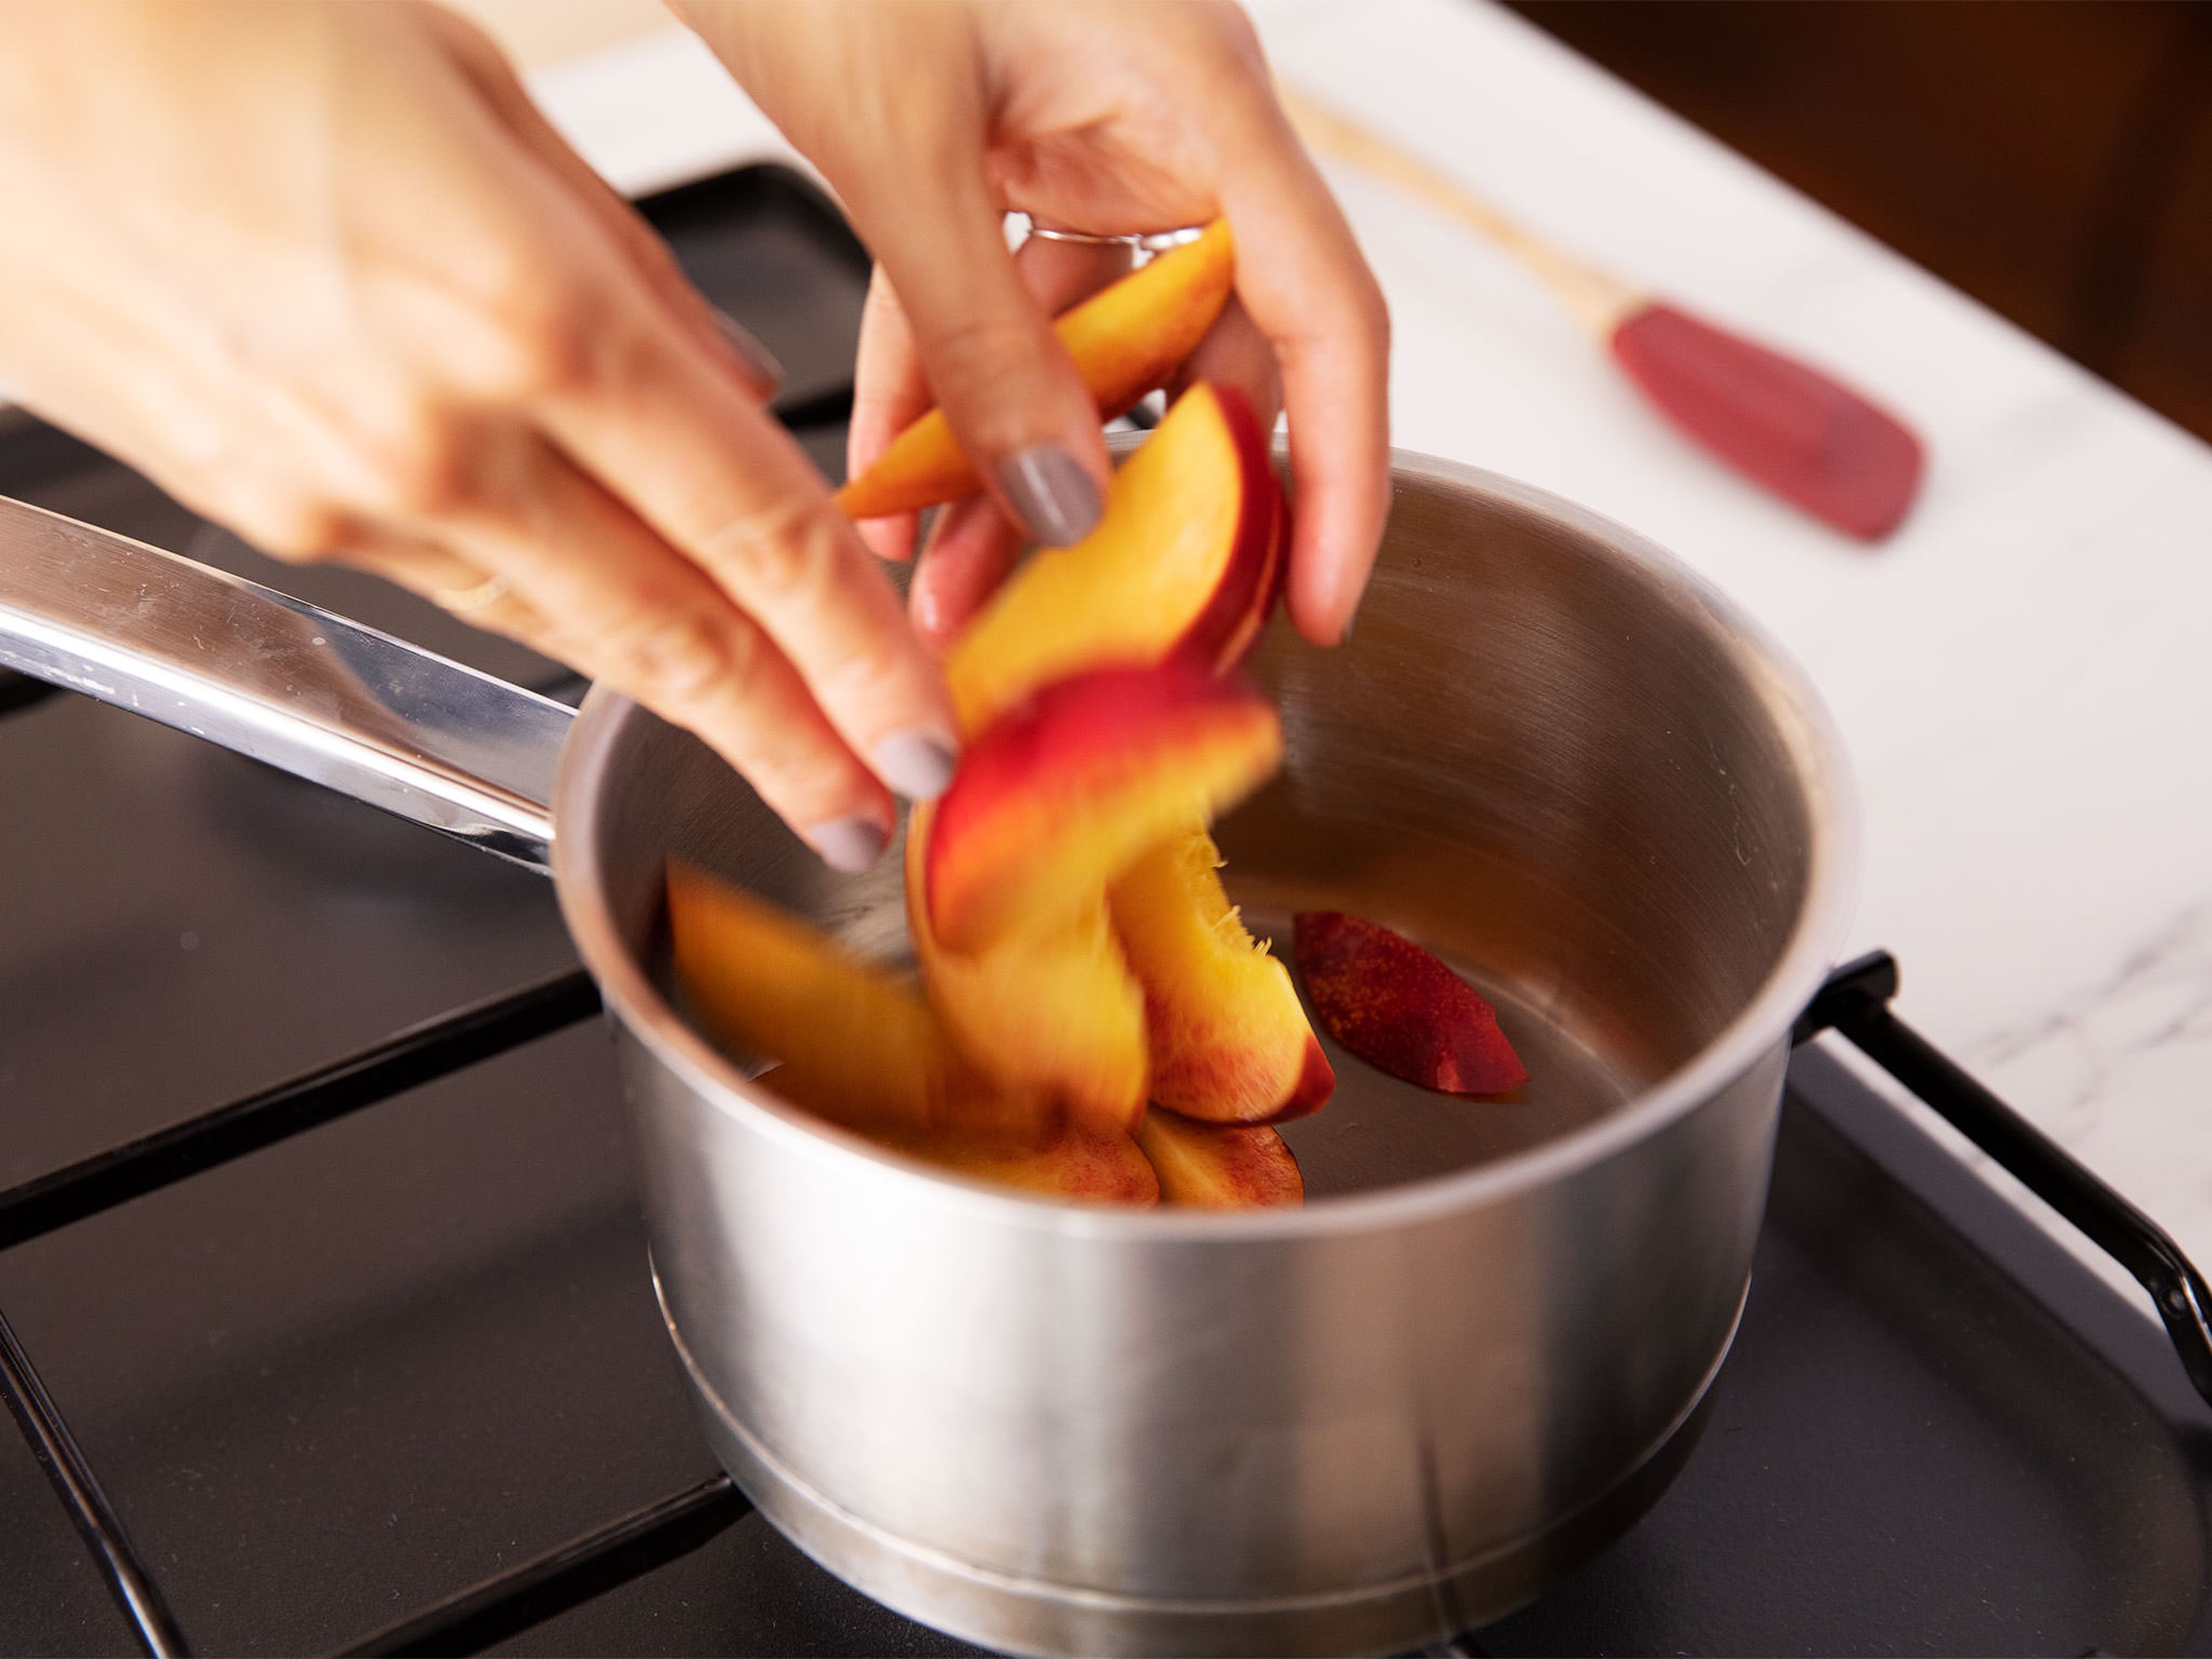 Core and cut the nectarine into slices. Cook in a pot over low heat until softened.